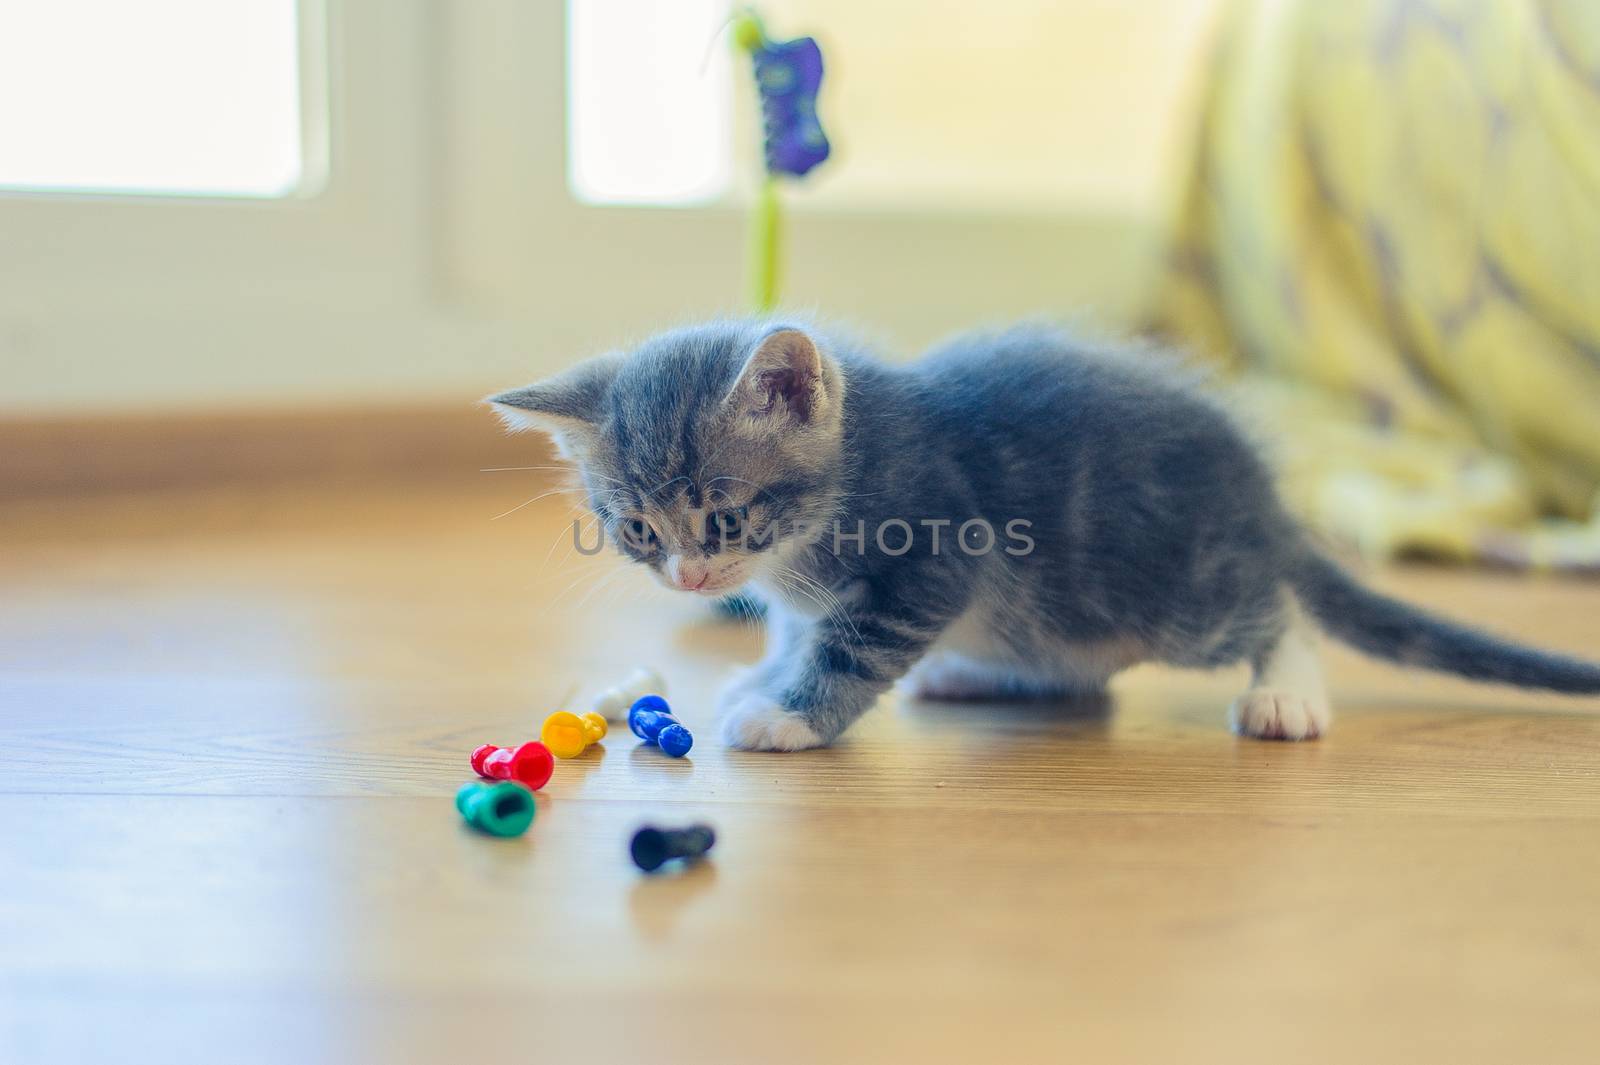 gray kitten is played with colorful figures on the floor by chernobrovin